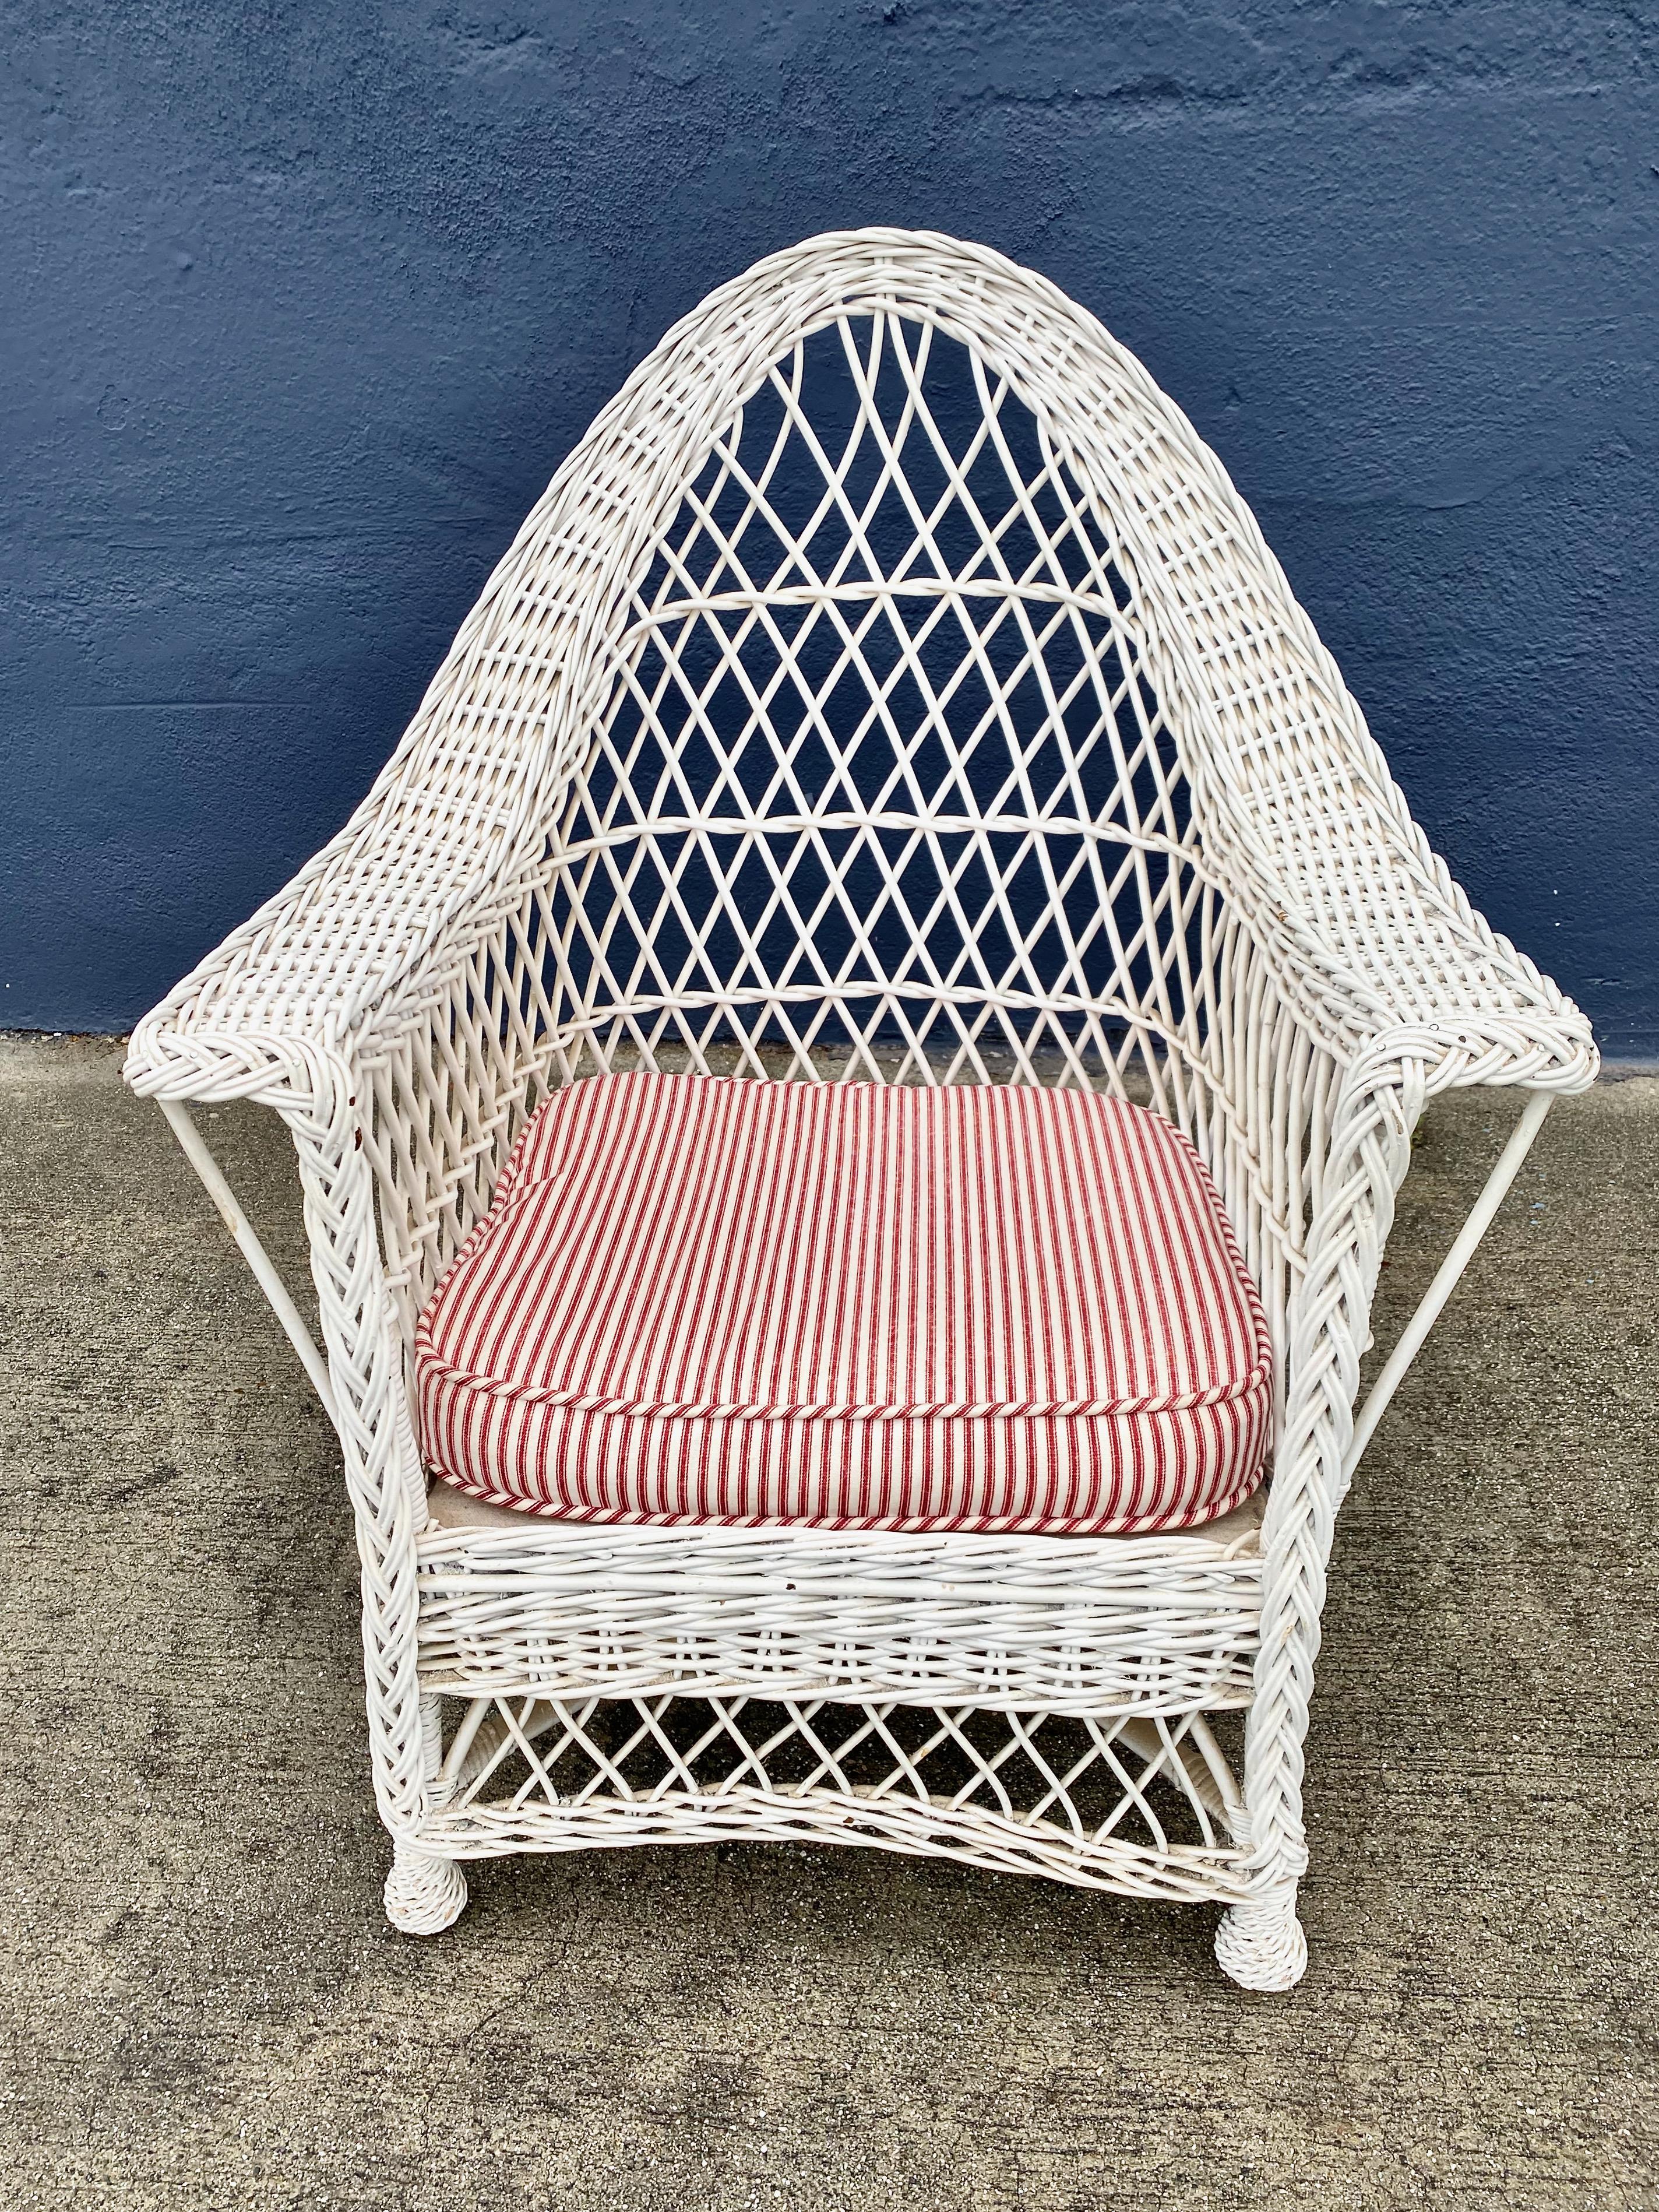 This is a superb example of an early 20th century wicker lounge chair attributed to Bar Harbor. The gothic arched back is an unusual detail and adds interest to the chair. This eye-catching chair is in overall very good condition with normal